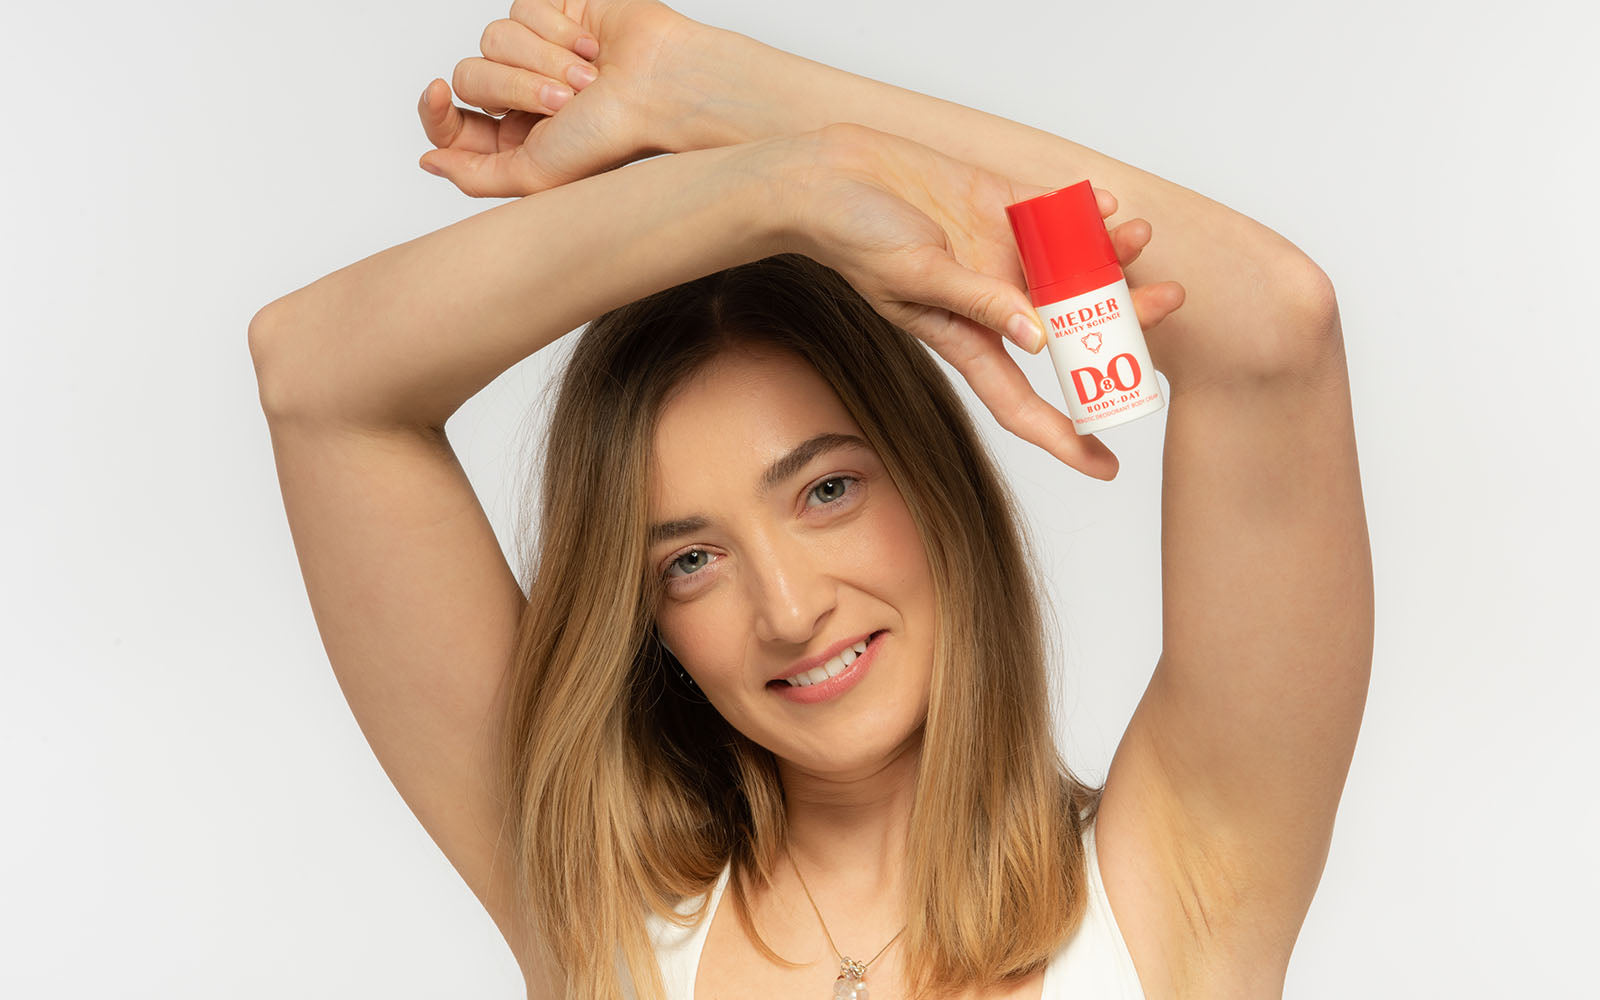 Why Switch To A Natural Deodorant?